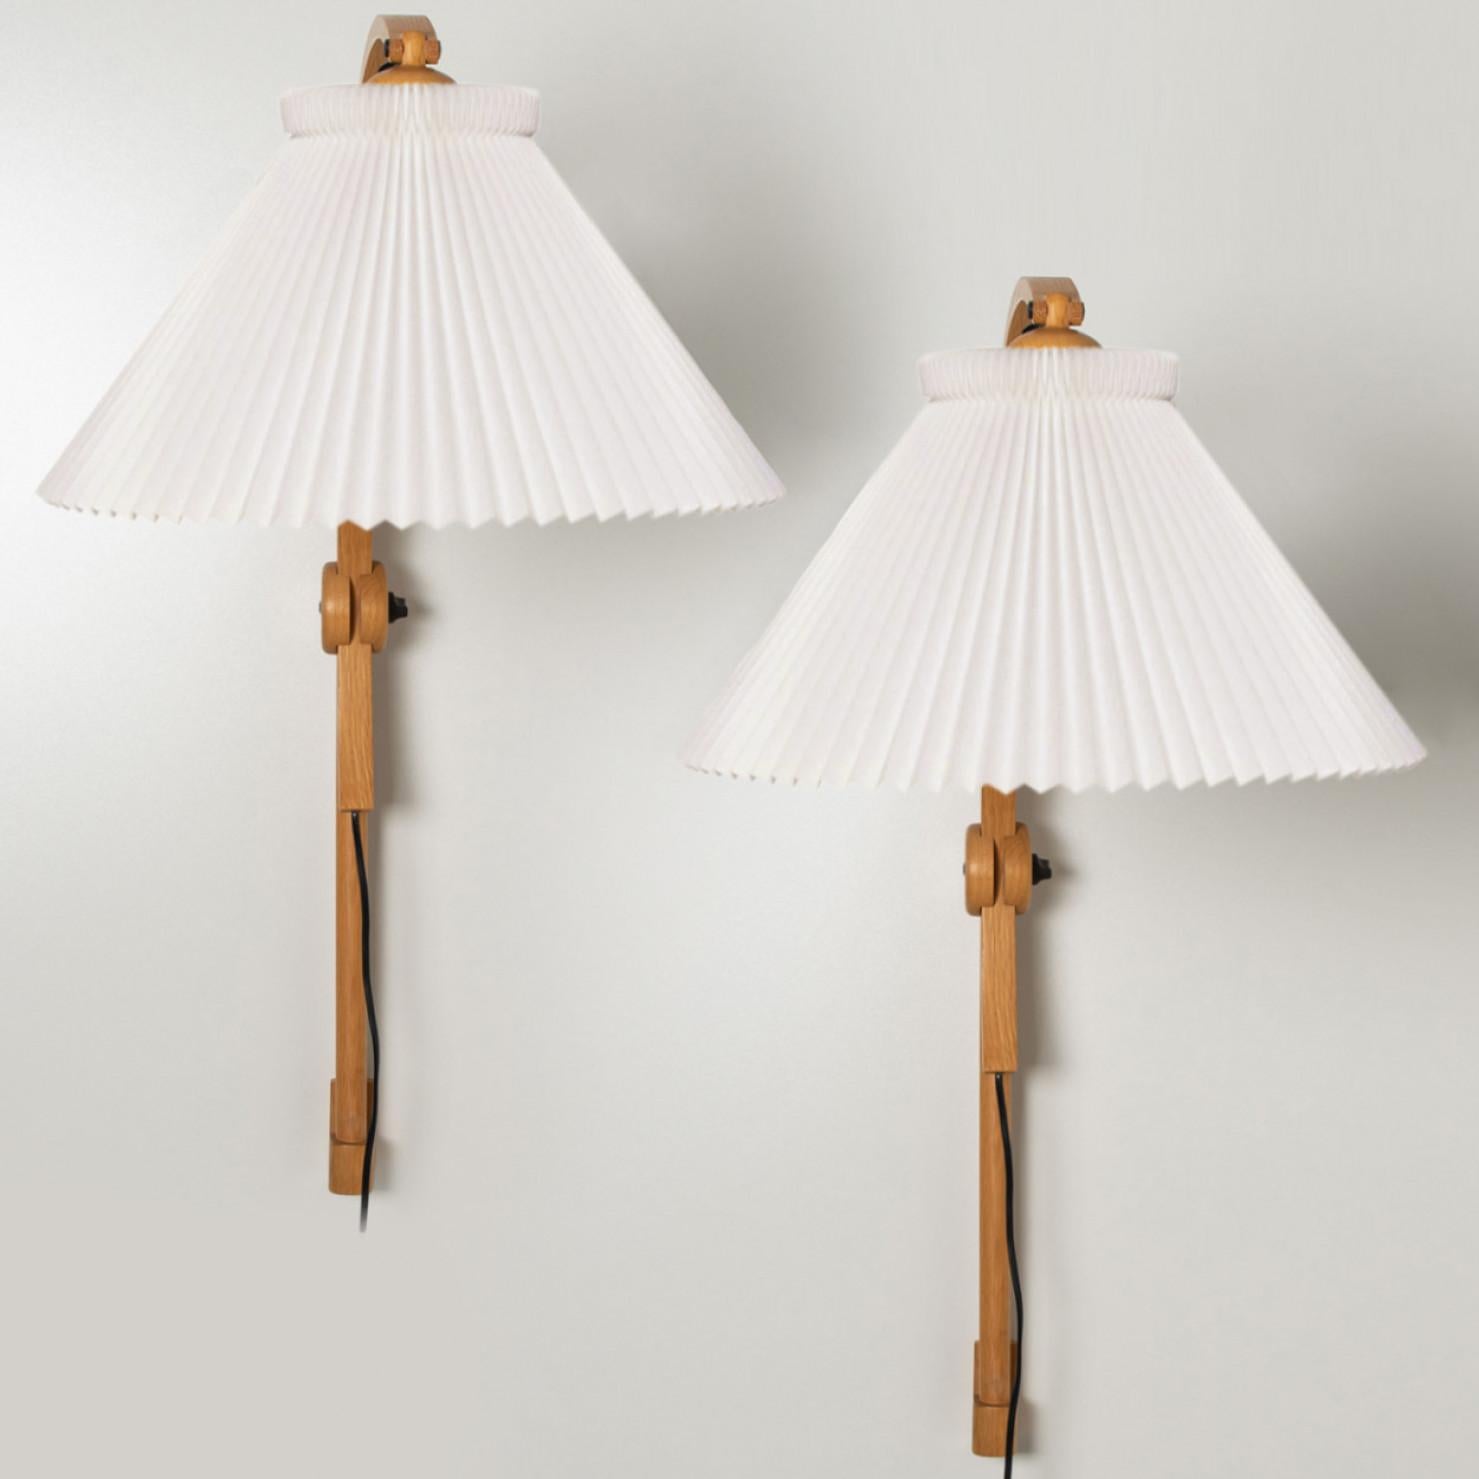 Mid-Century Modern Pair of Wooden Wall Lights with New Le Klint Shade by Domus Germany, 1970s For Sale